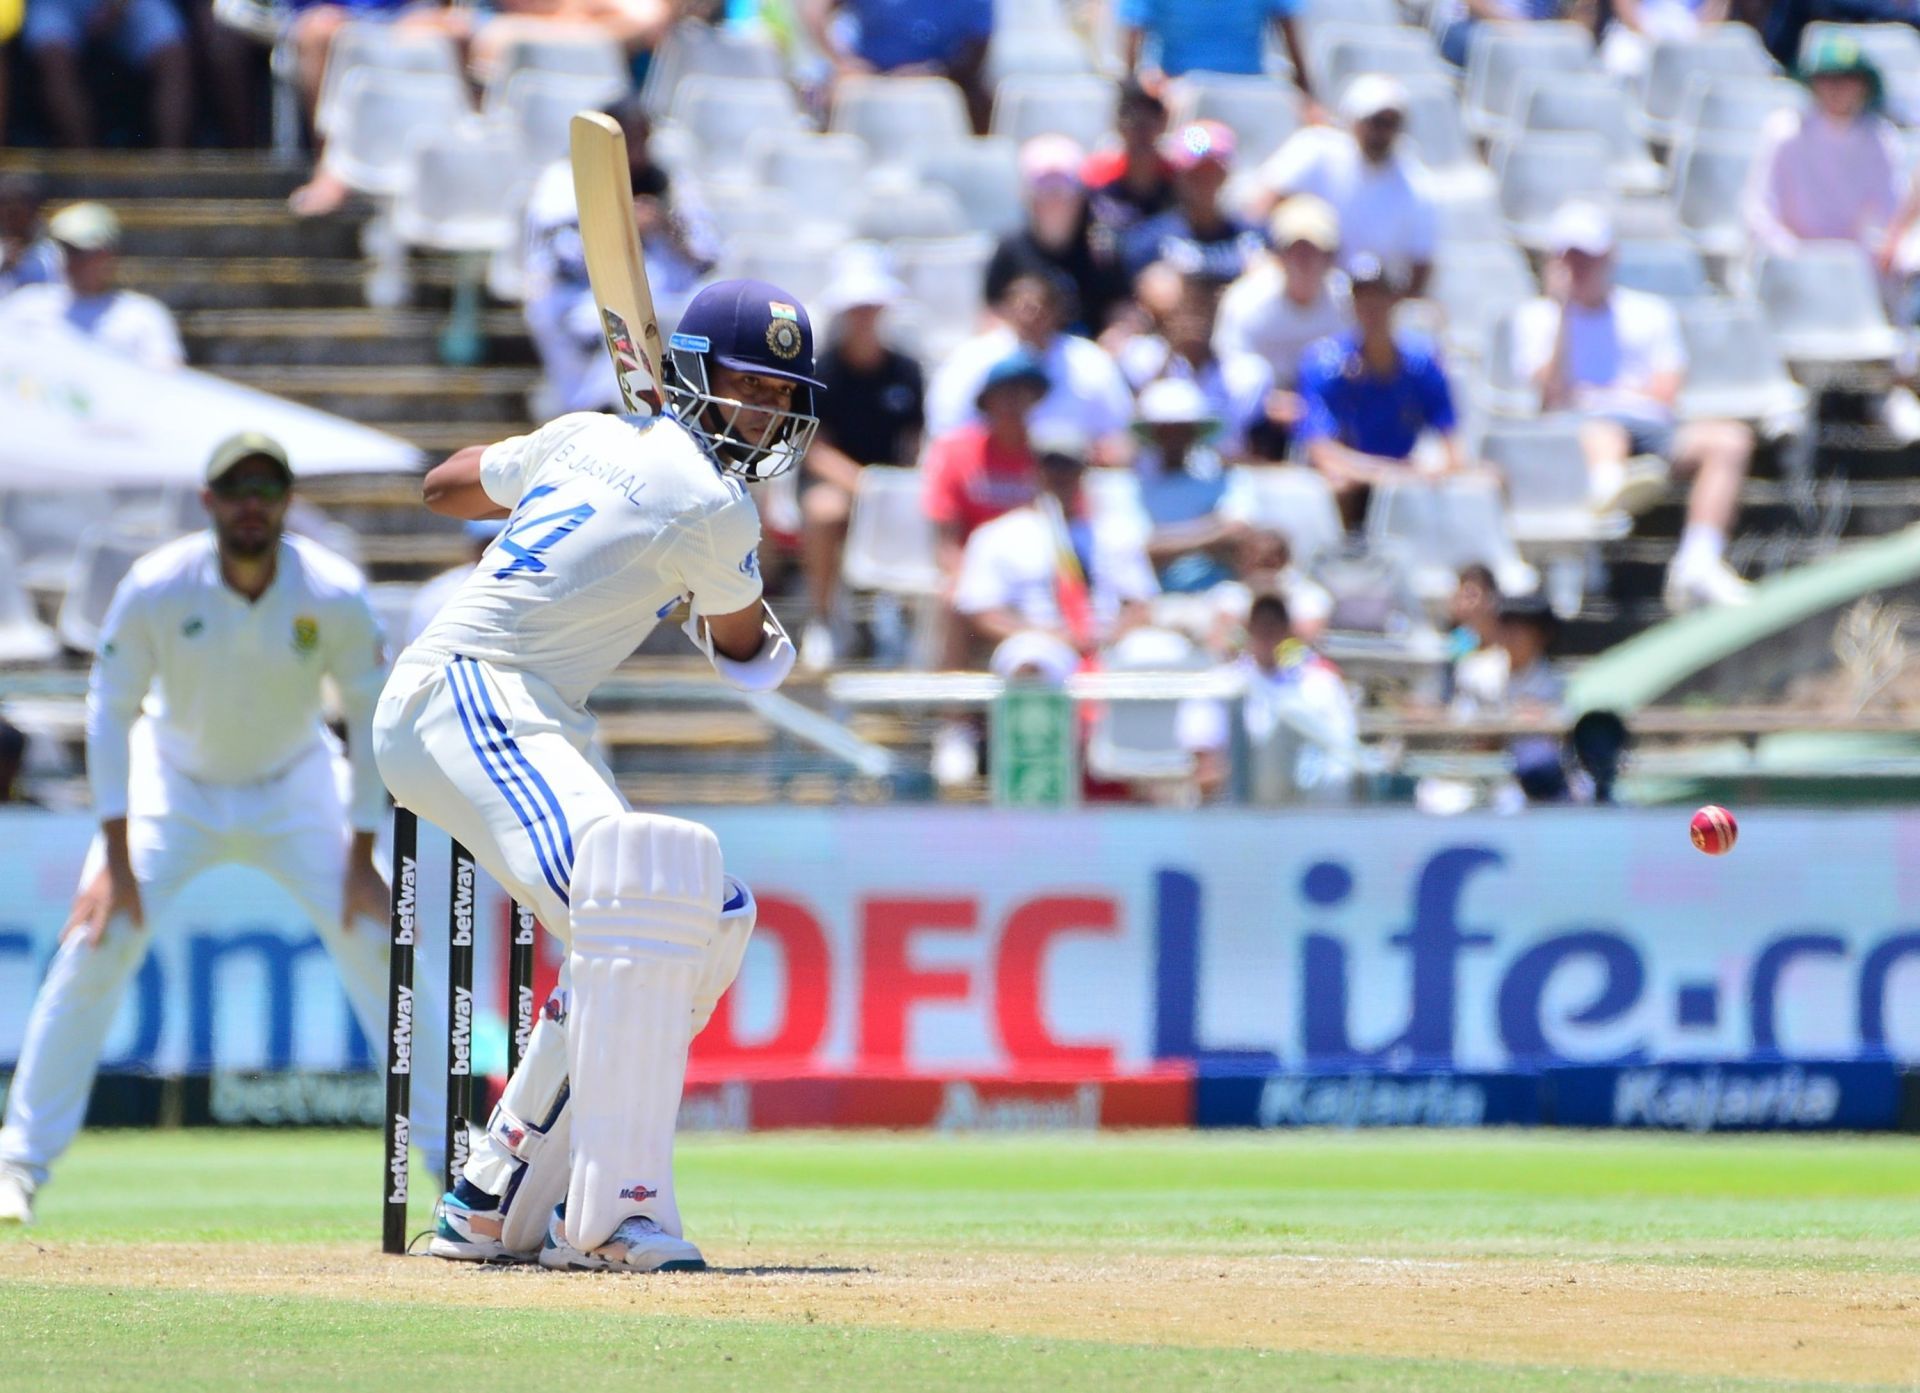 &lt;a href=&#039;https://www.sportskeeda.com/player/jaiswal-yashasvi&#039; target=&#039;_blank&#039; rel=&#039;noopener noreferrer&#039;&gt;Yashasvi Jaiswal&lt;/a&gt; bats in the second innings of the South Africa v India - 2nd Test